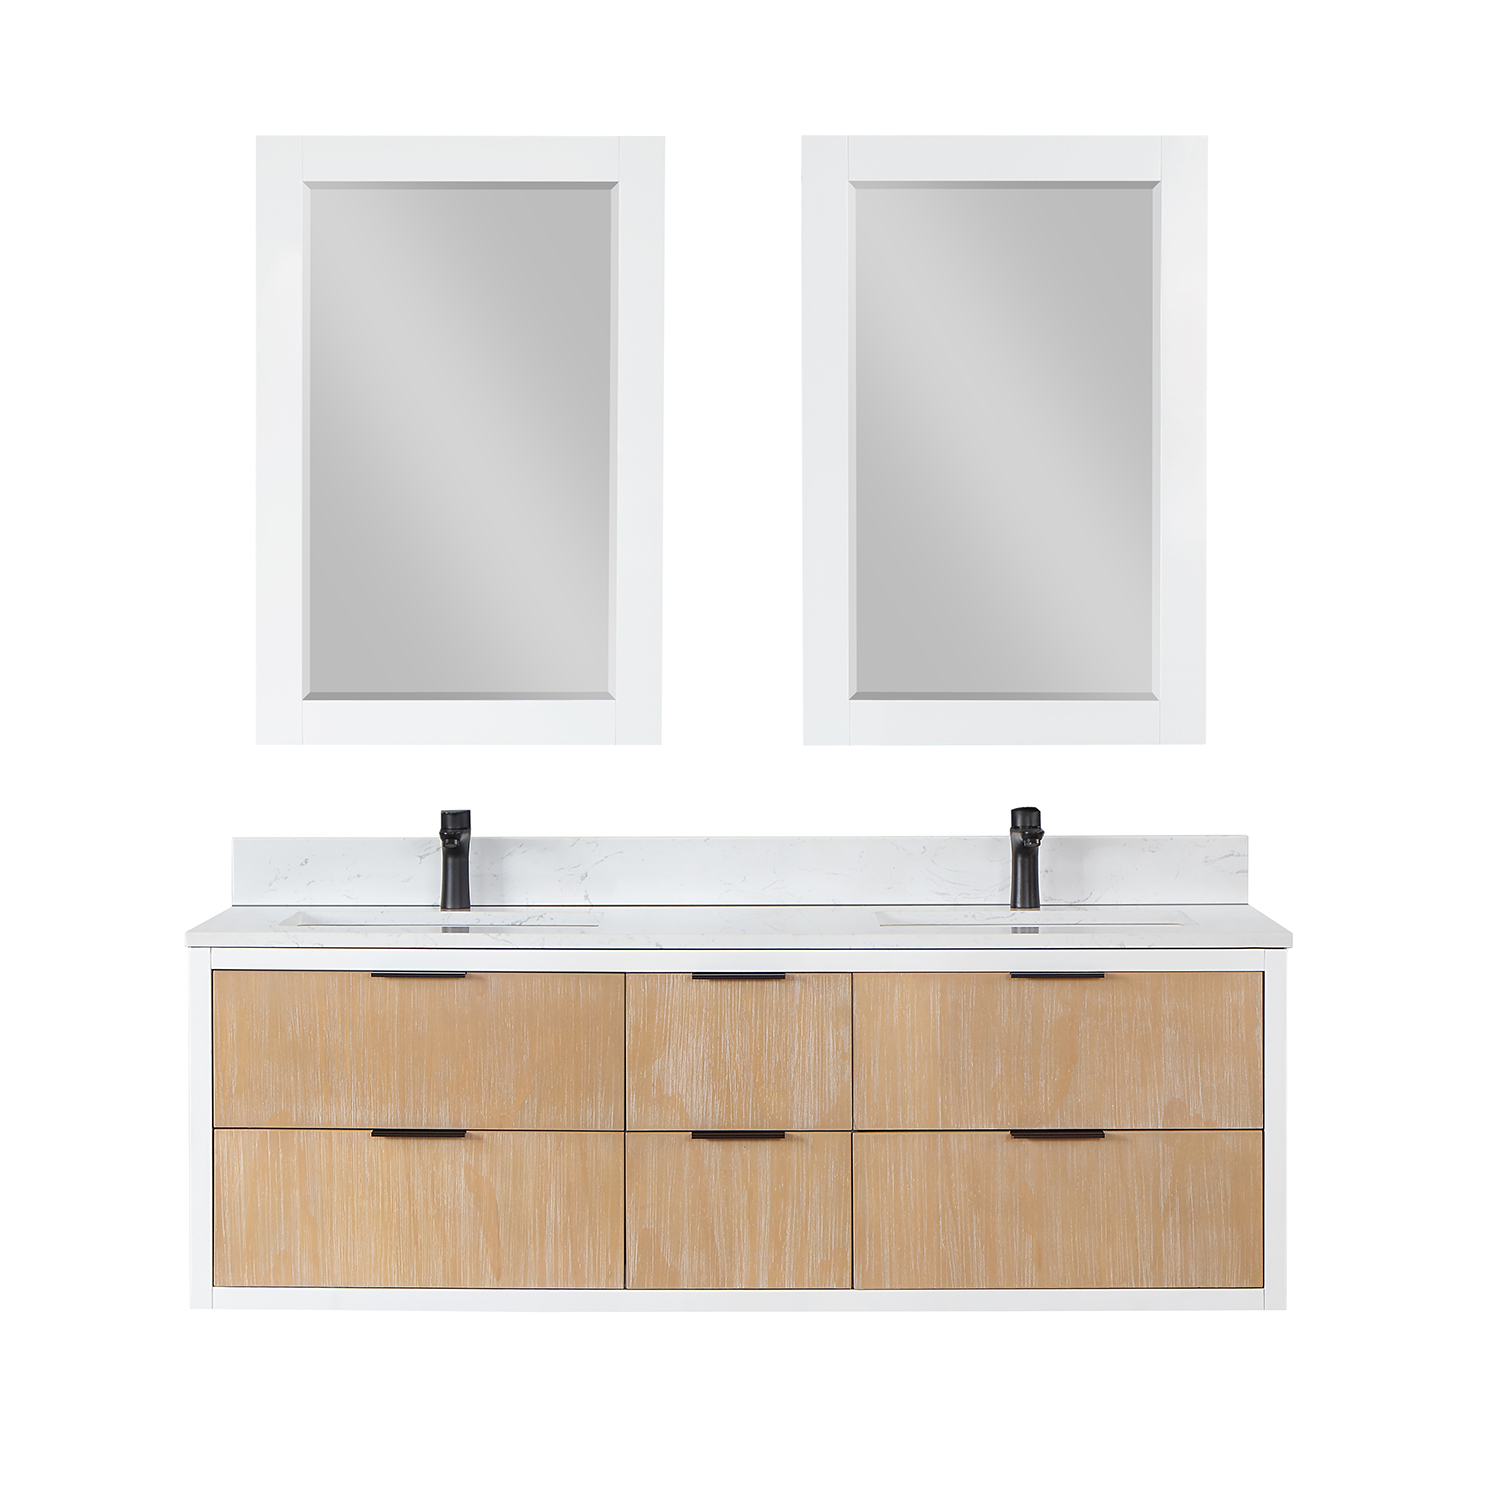 Issac Edwards Collection 60" Double Bathroom Vanity in Weathered Pine with Carrara White Composite Stone Countertop without Mirror 